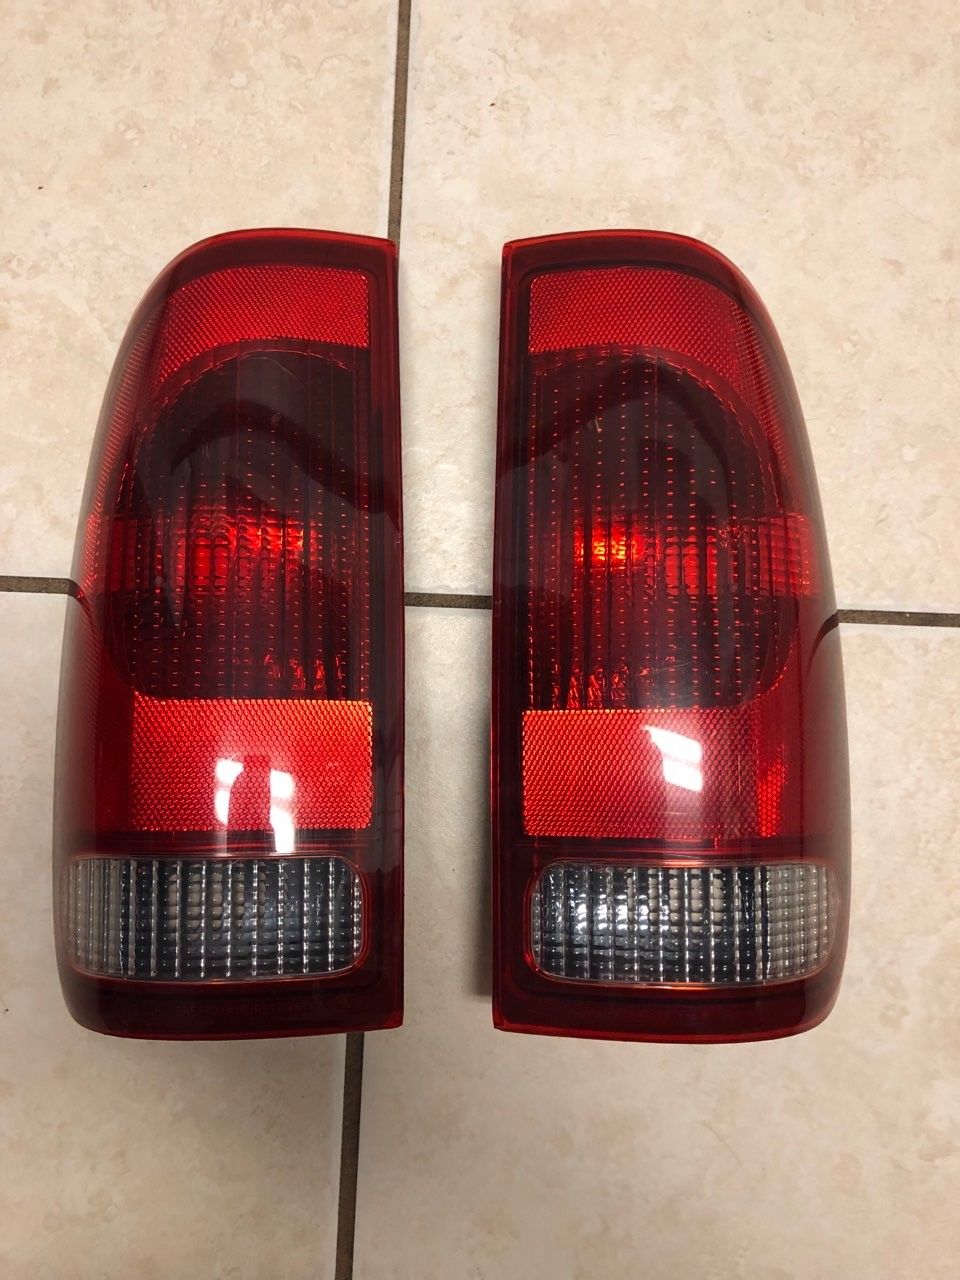 2006 F350 Rear Taillights/Front Wheel Center Caps (OEM)